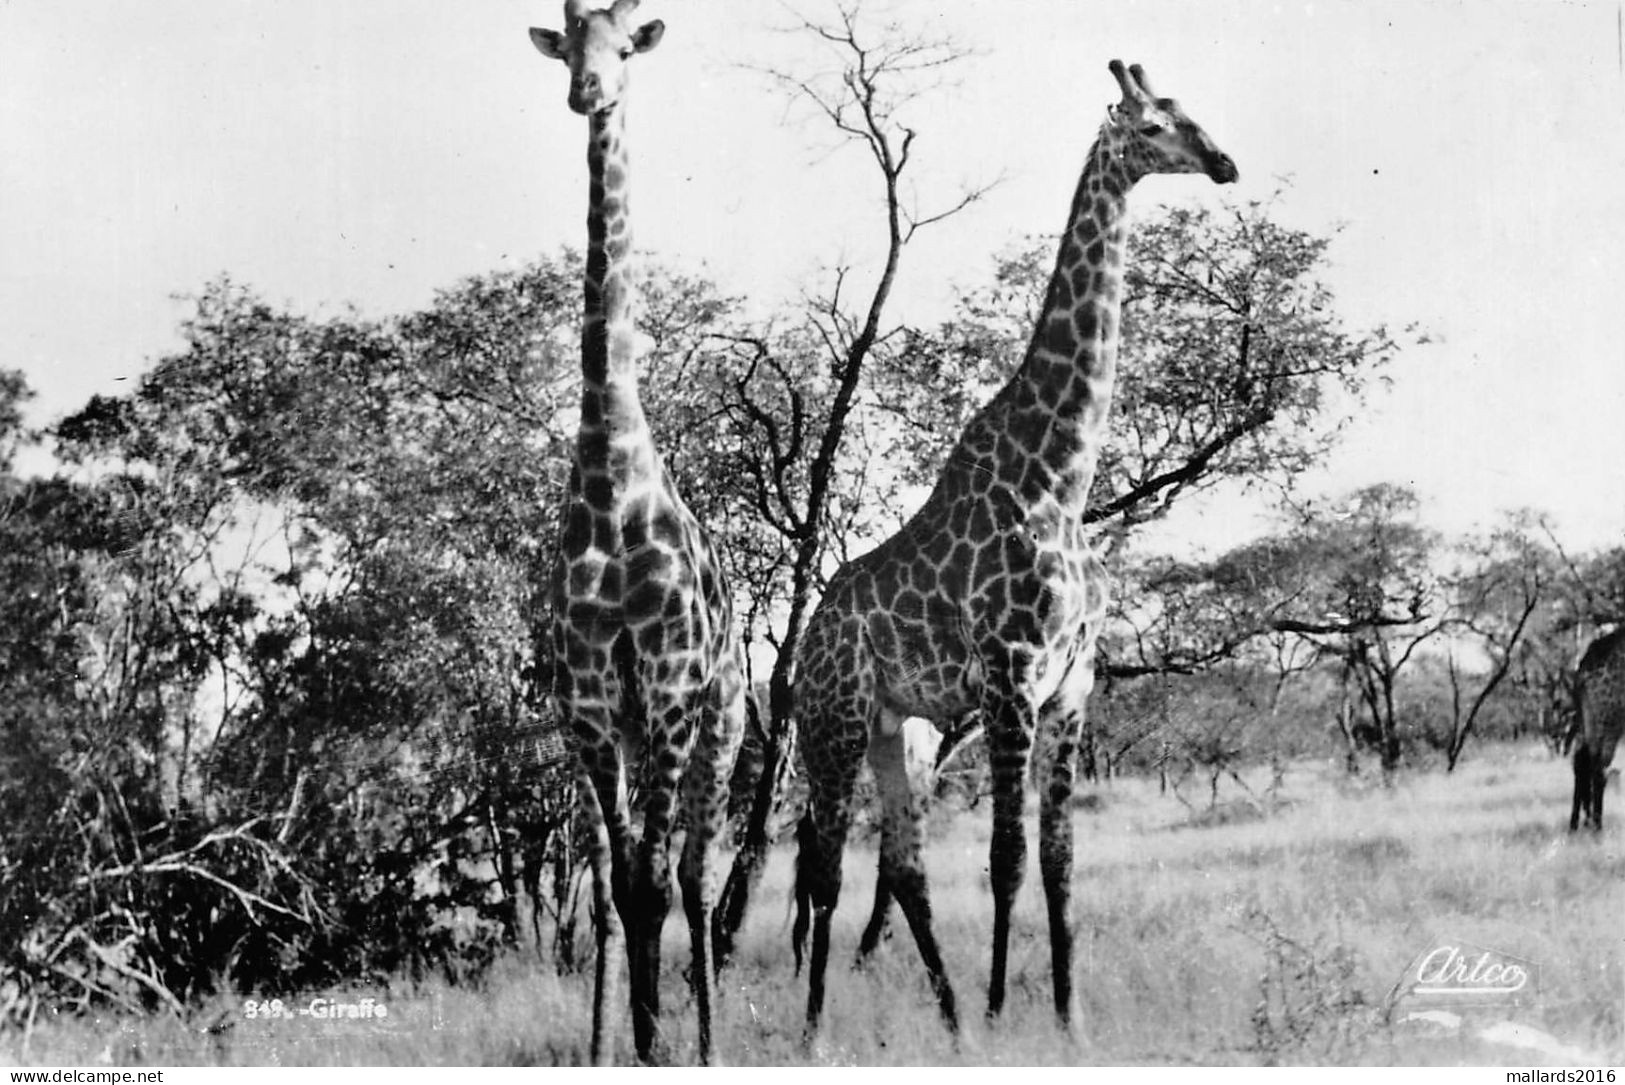 SOUTH AFRICA - ANIMALS - 5 OLD REAL PHOTO POSTCARDS #2357344